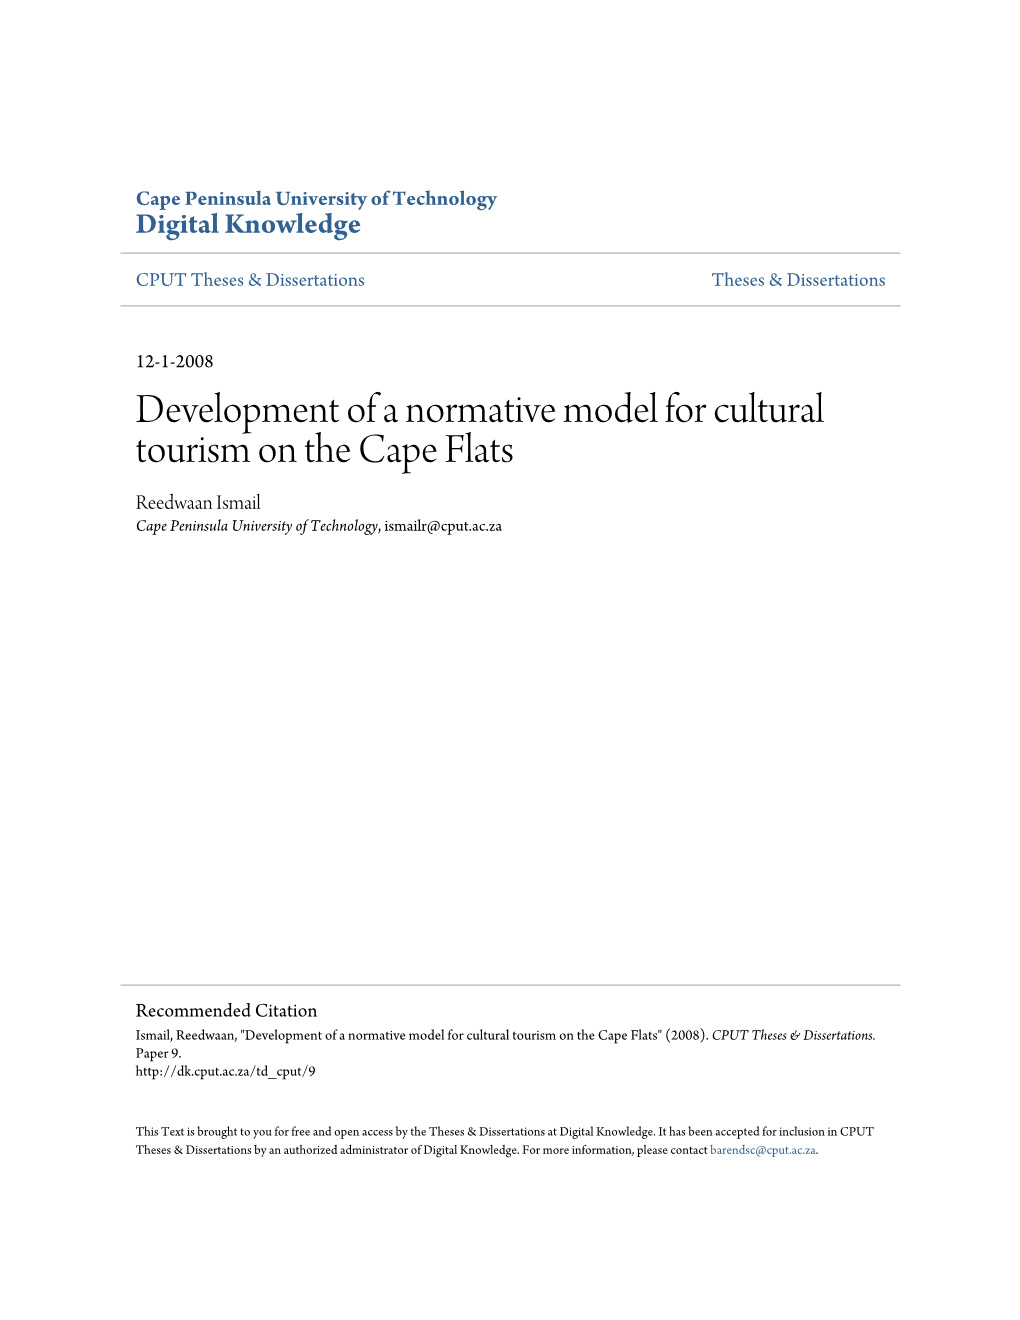 Development of a Normative Model for Cultural Tourism on the Cape Flats Reedwaan Ismail Cape Peninsula University of Technology, Ismailr@Cput.Ac.Za